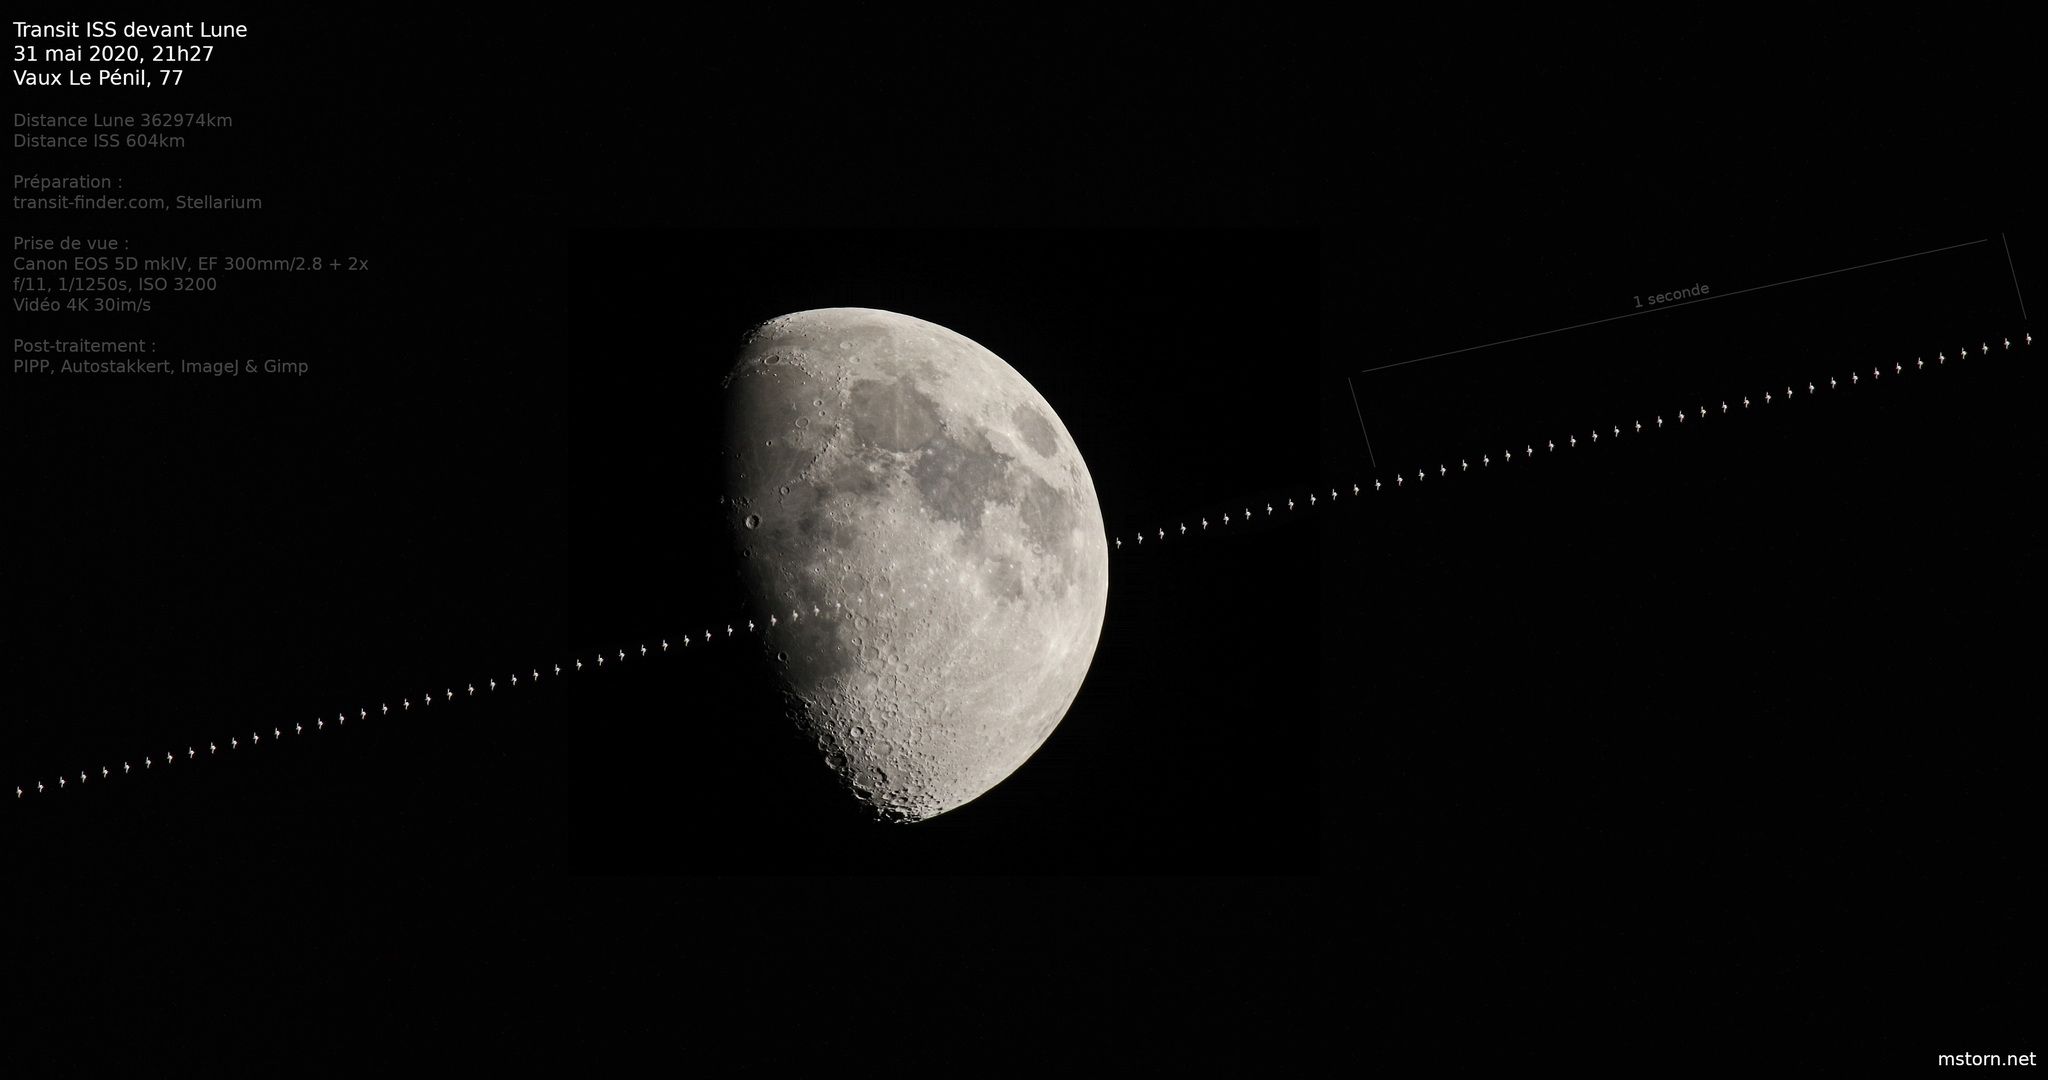 2020-05-31 Transit Lune+ISS montage commentaire.jpg